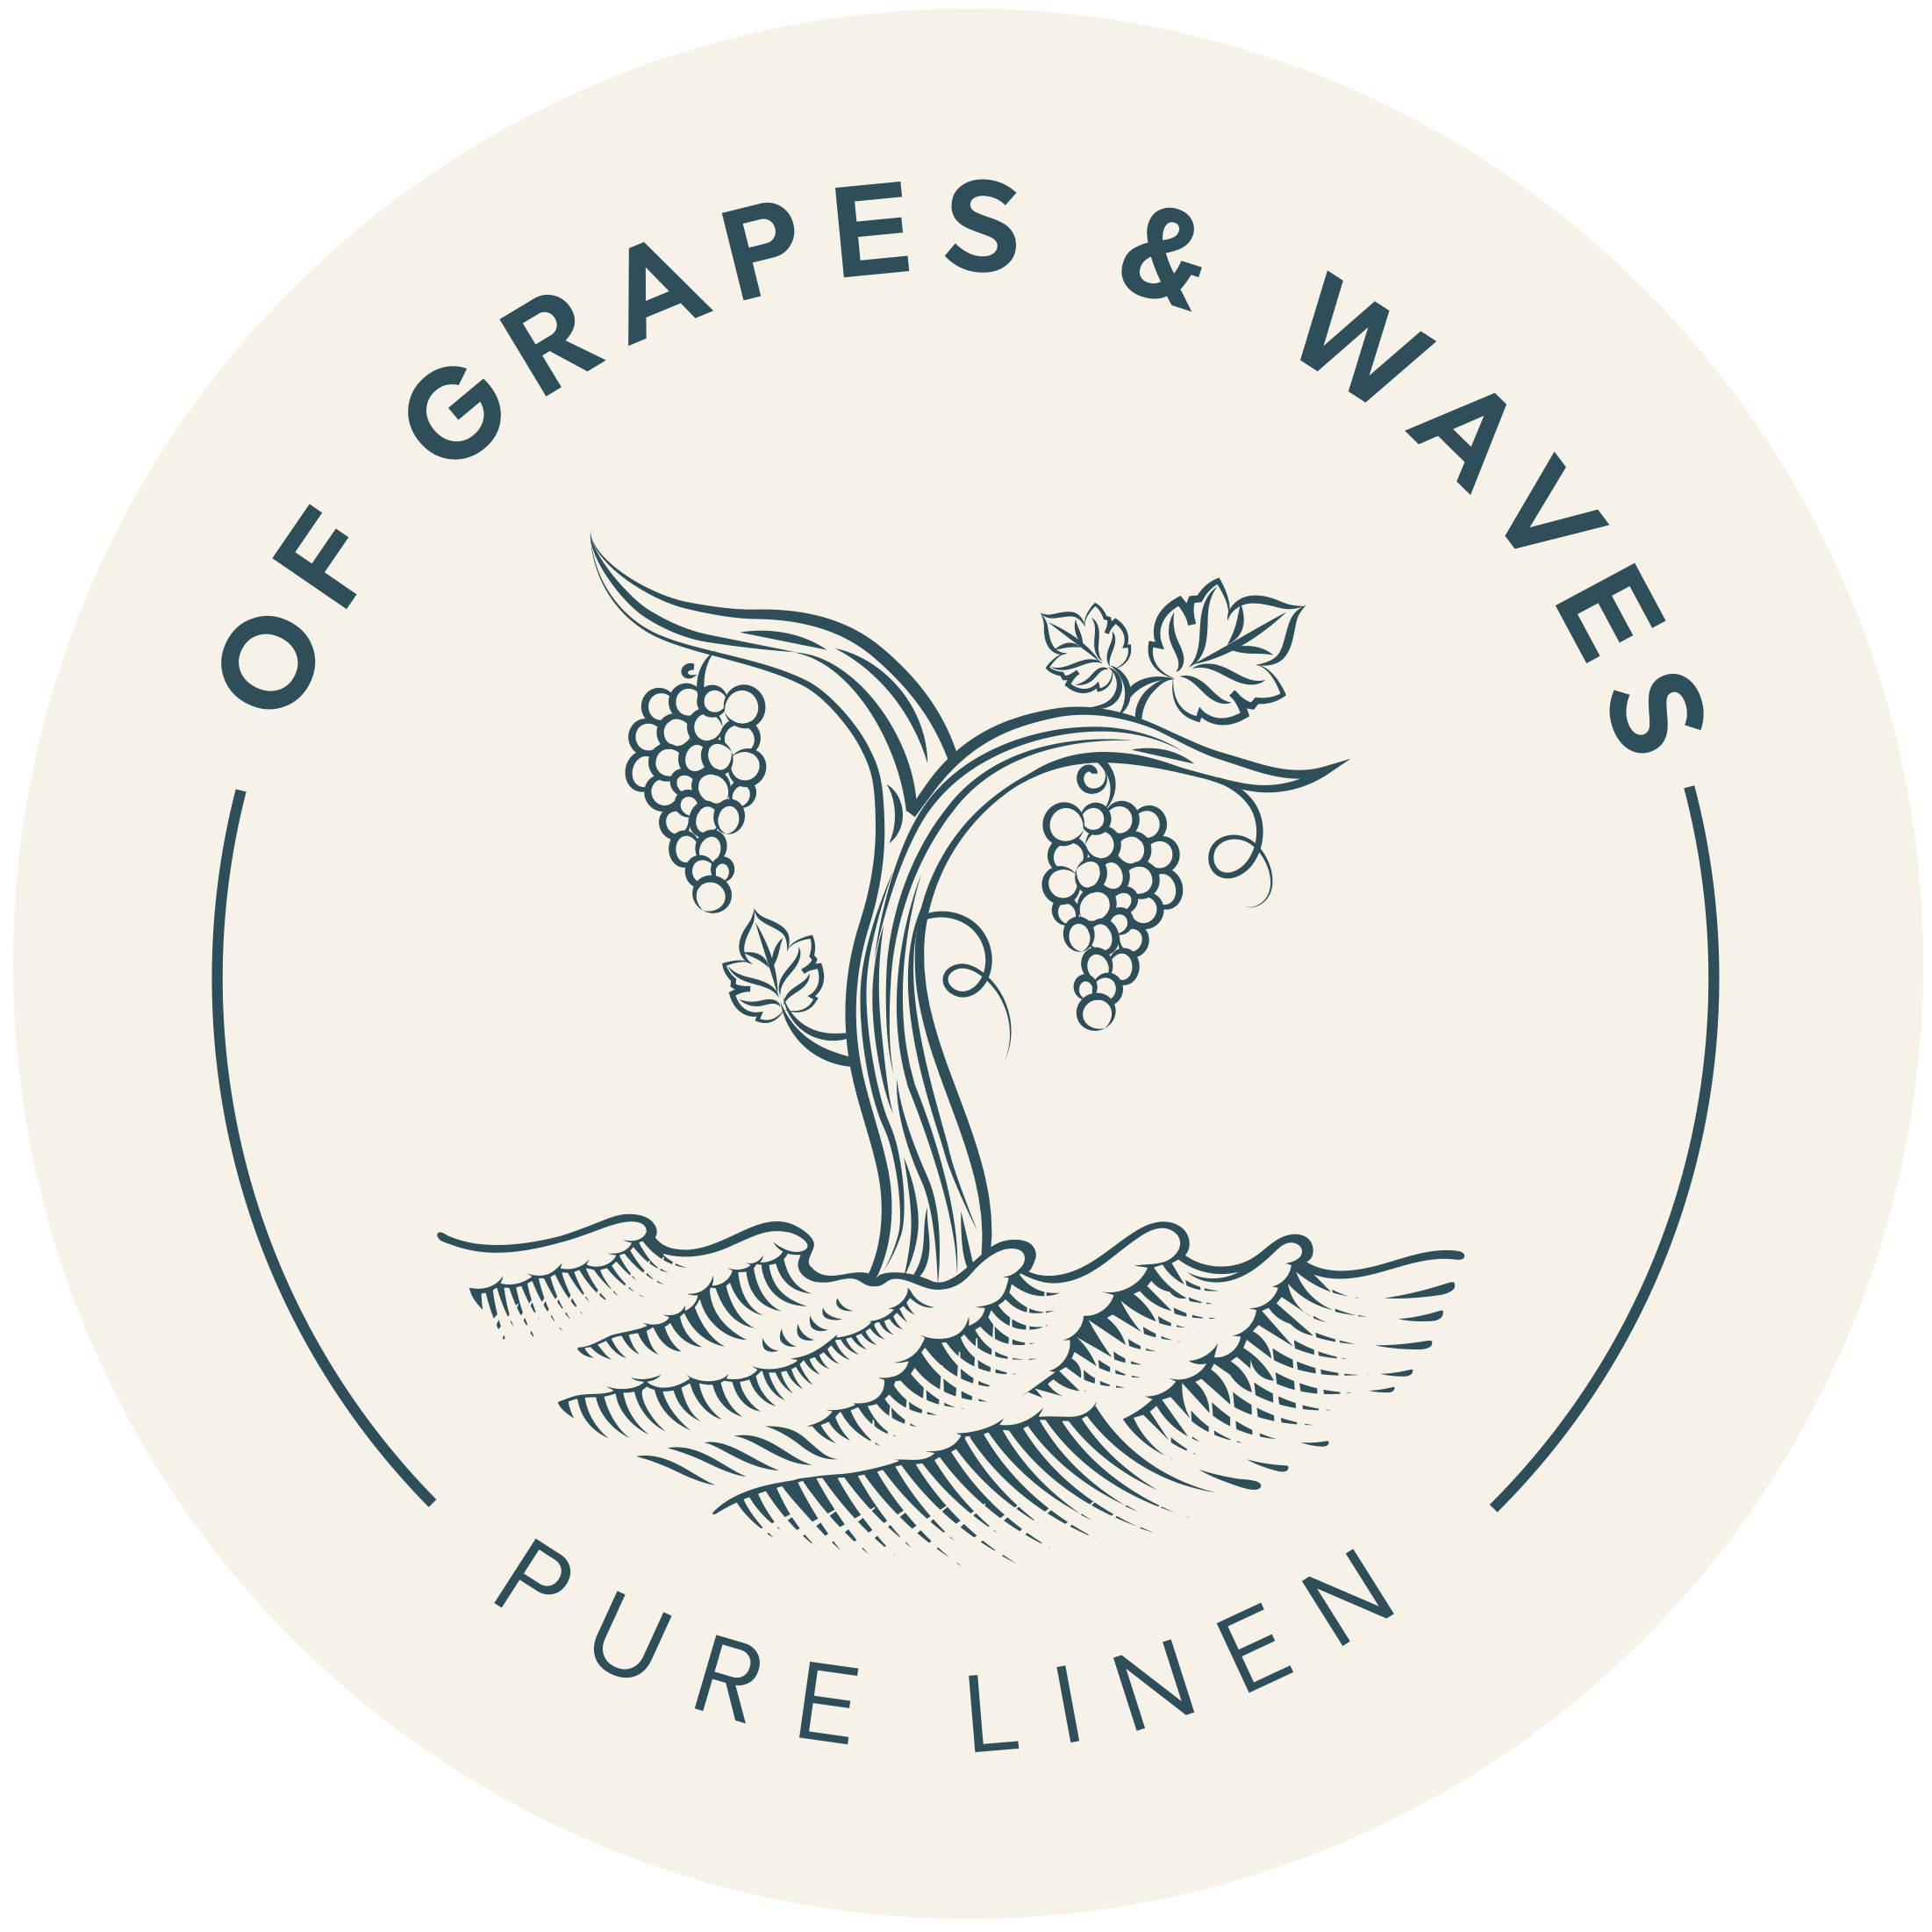 Of Grapes & Waves